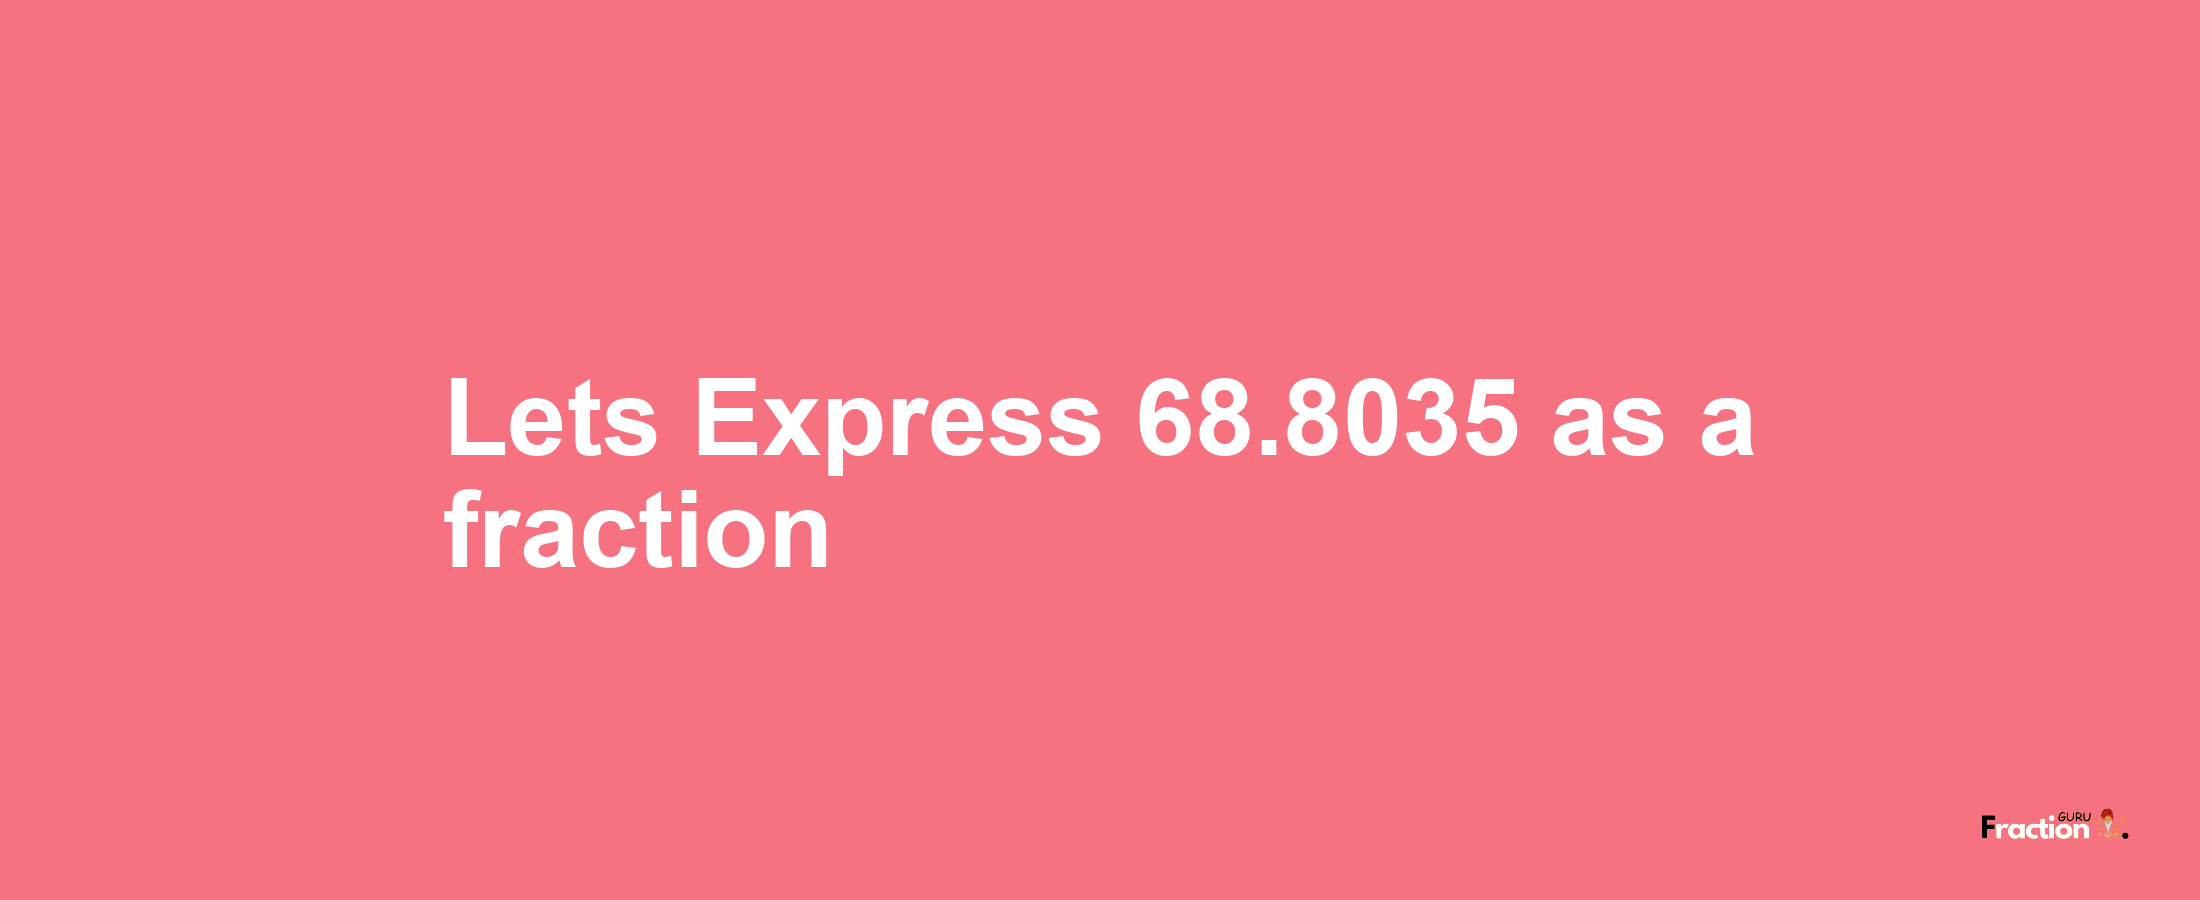 Lets Express 68.8035 as afraction